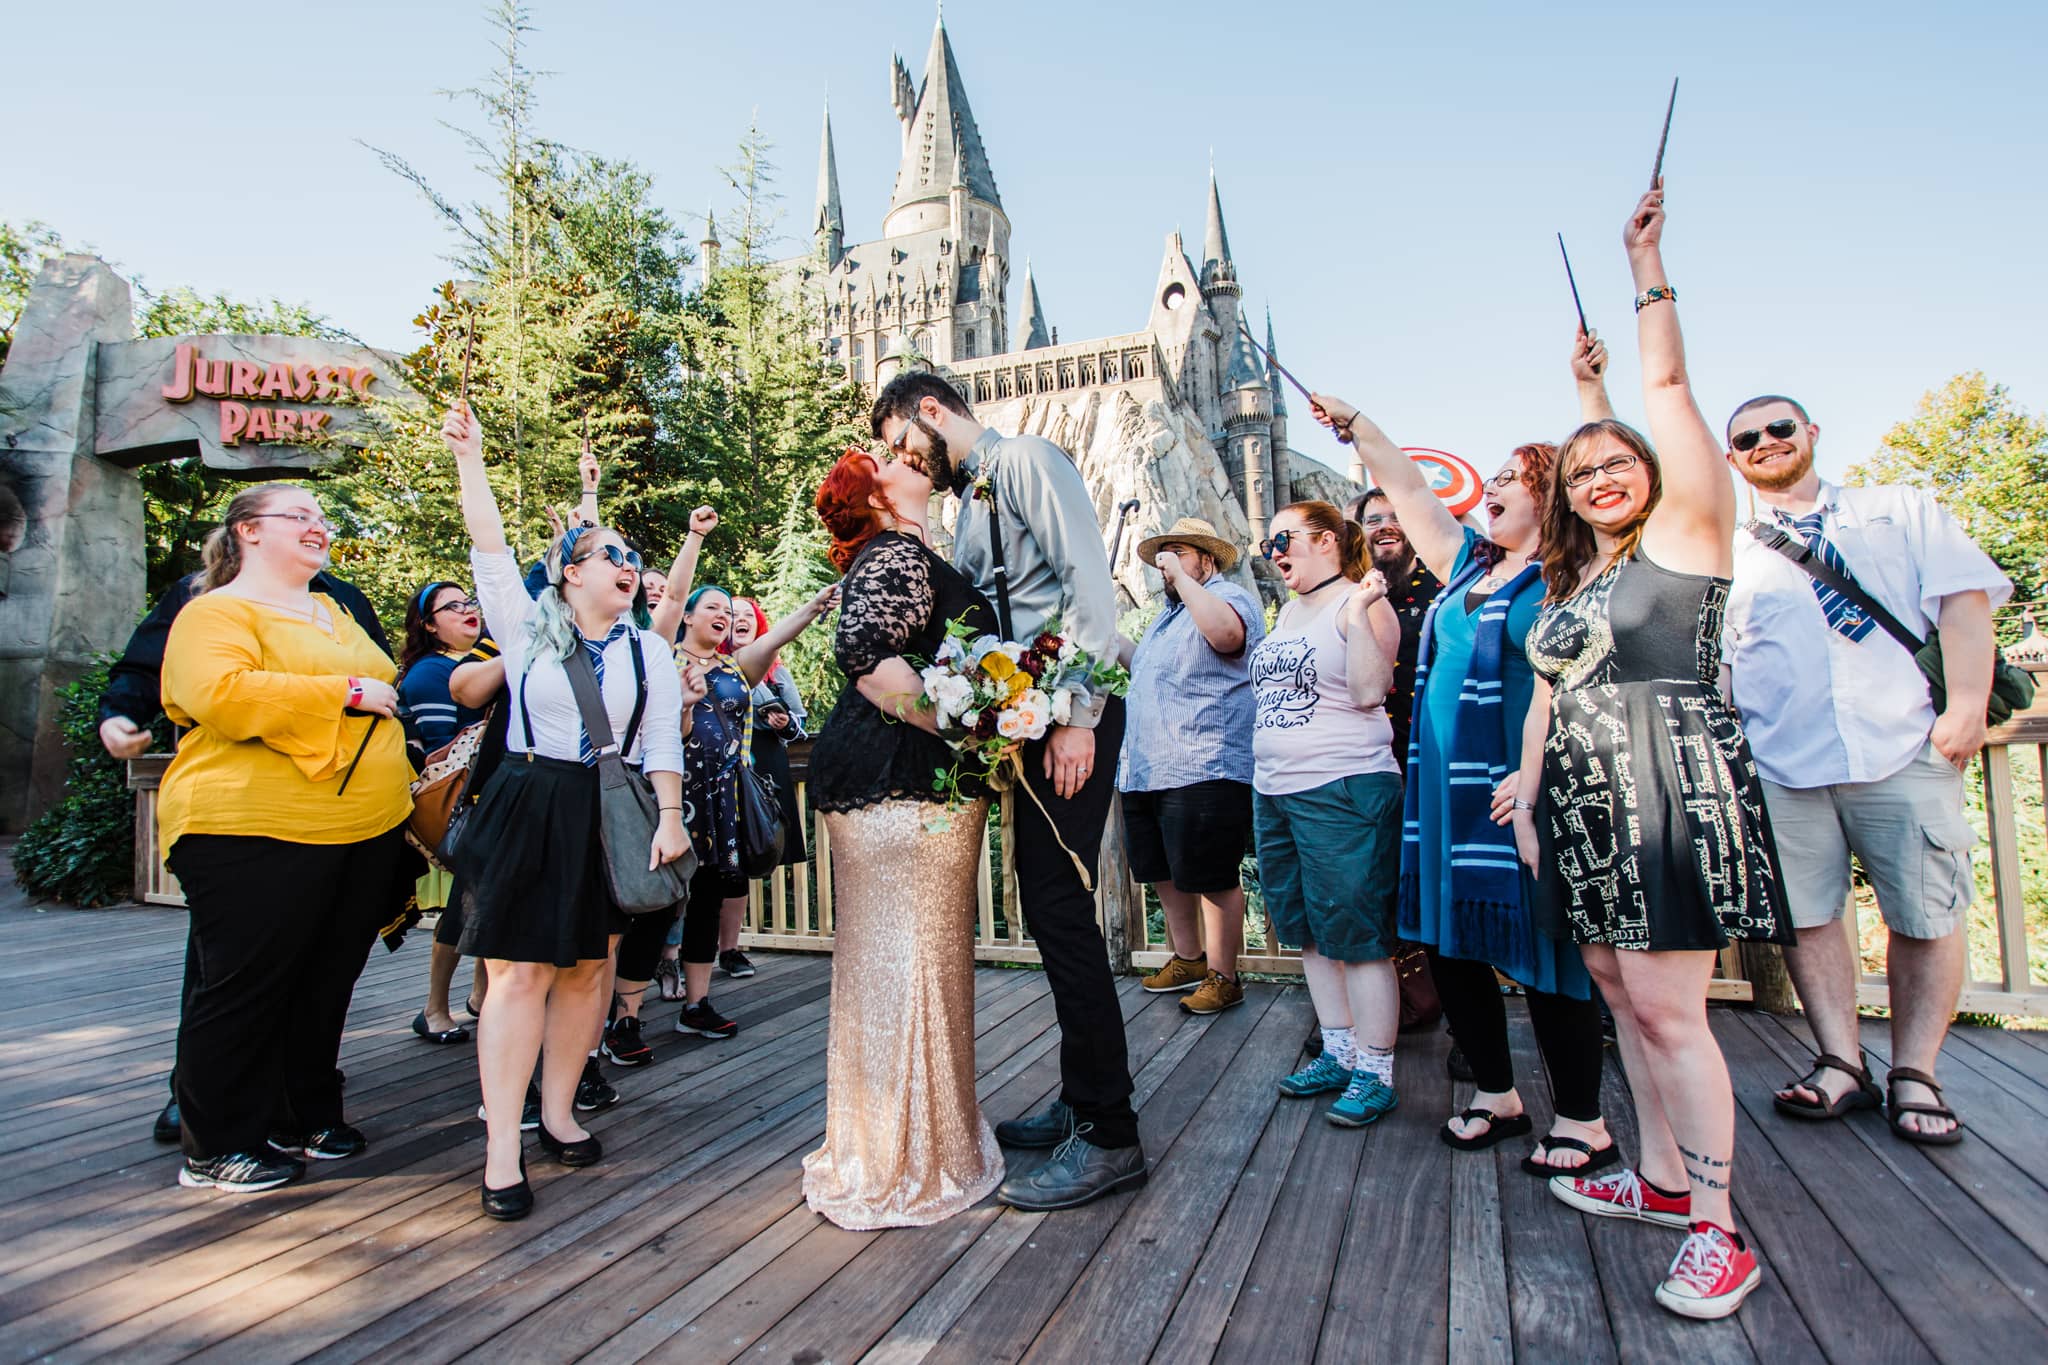 couple renewing vows and kissing in front of Hogwarts castle at universal orlando while surrounded by friends holding up wands